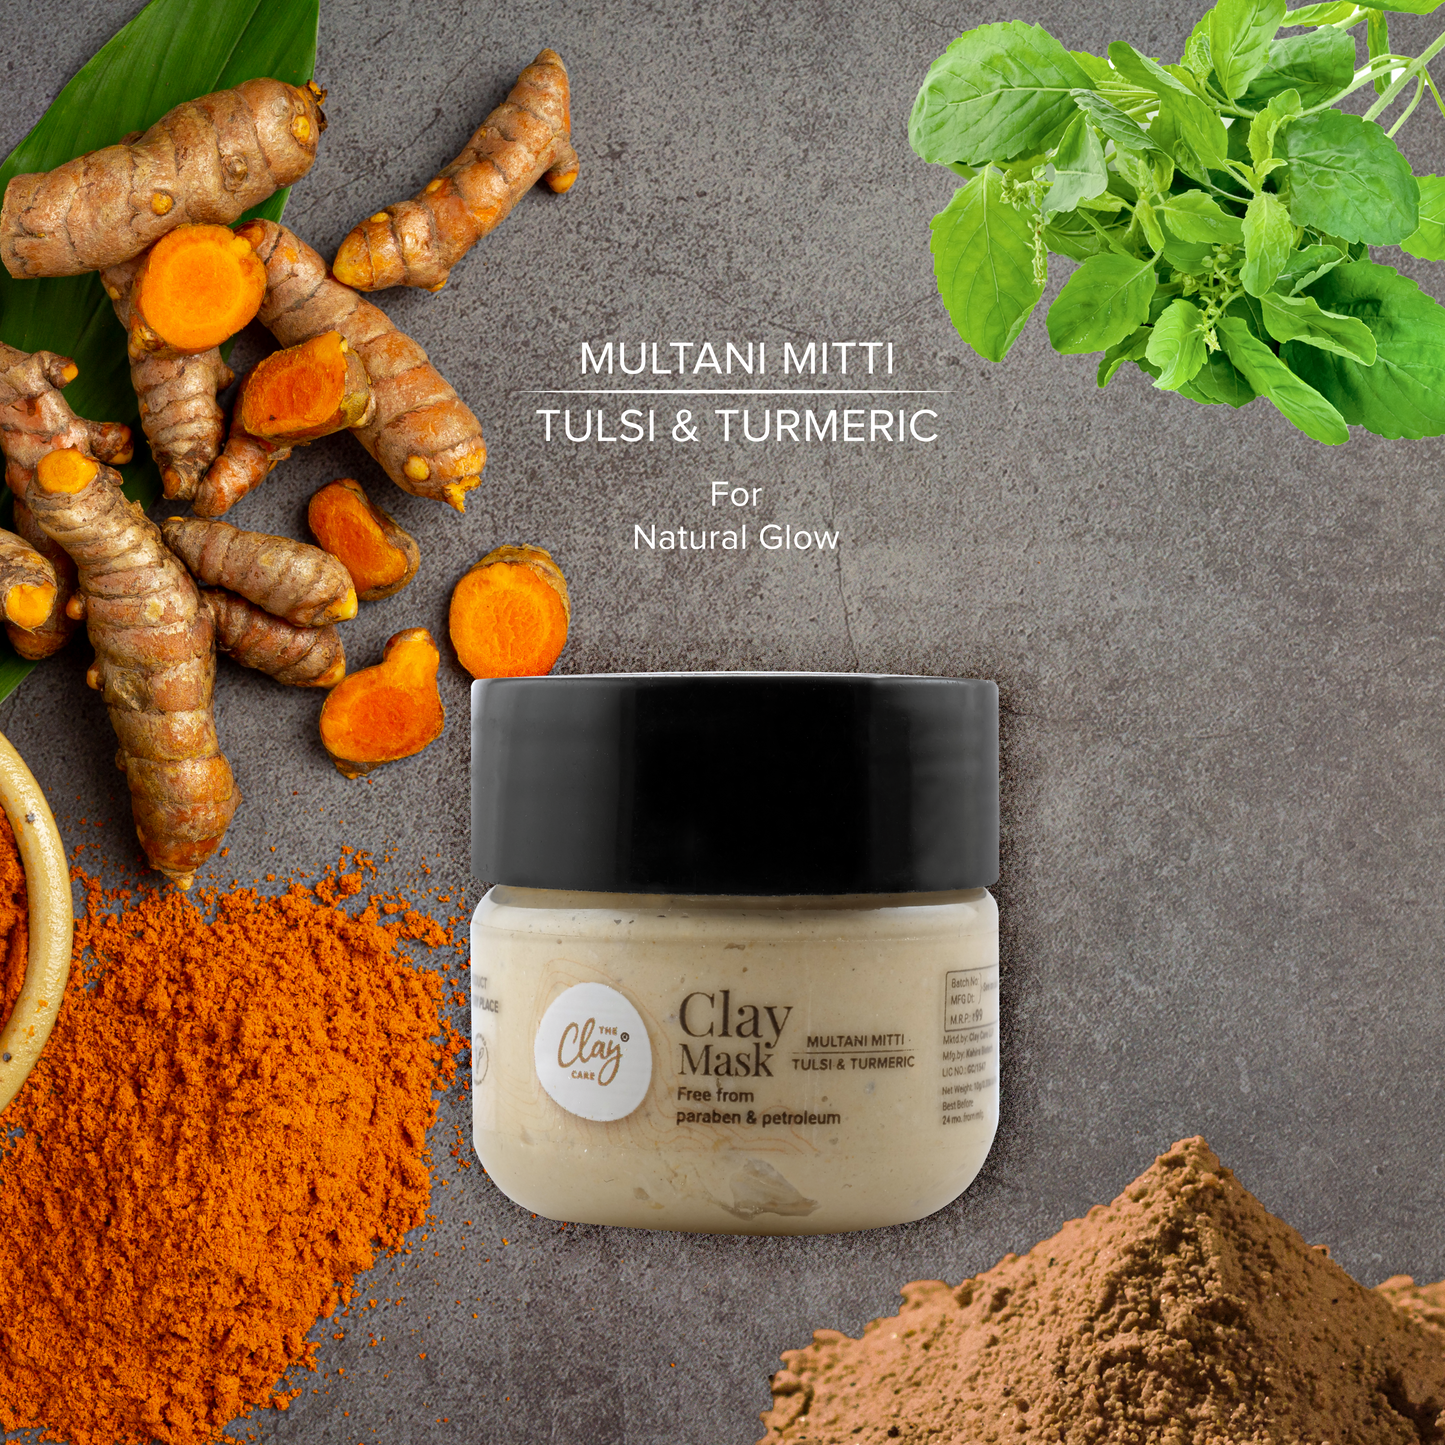 Clay Care Multani Mitti Face Pack Mask for Glowing Skin, Tan Removal & Sun Damage Protection with Turmeric & Tulsi- Paraben and Petroleum Free